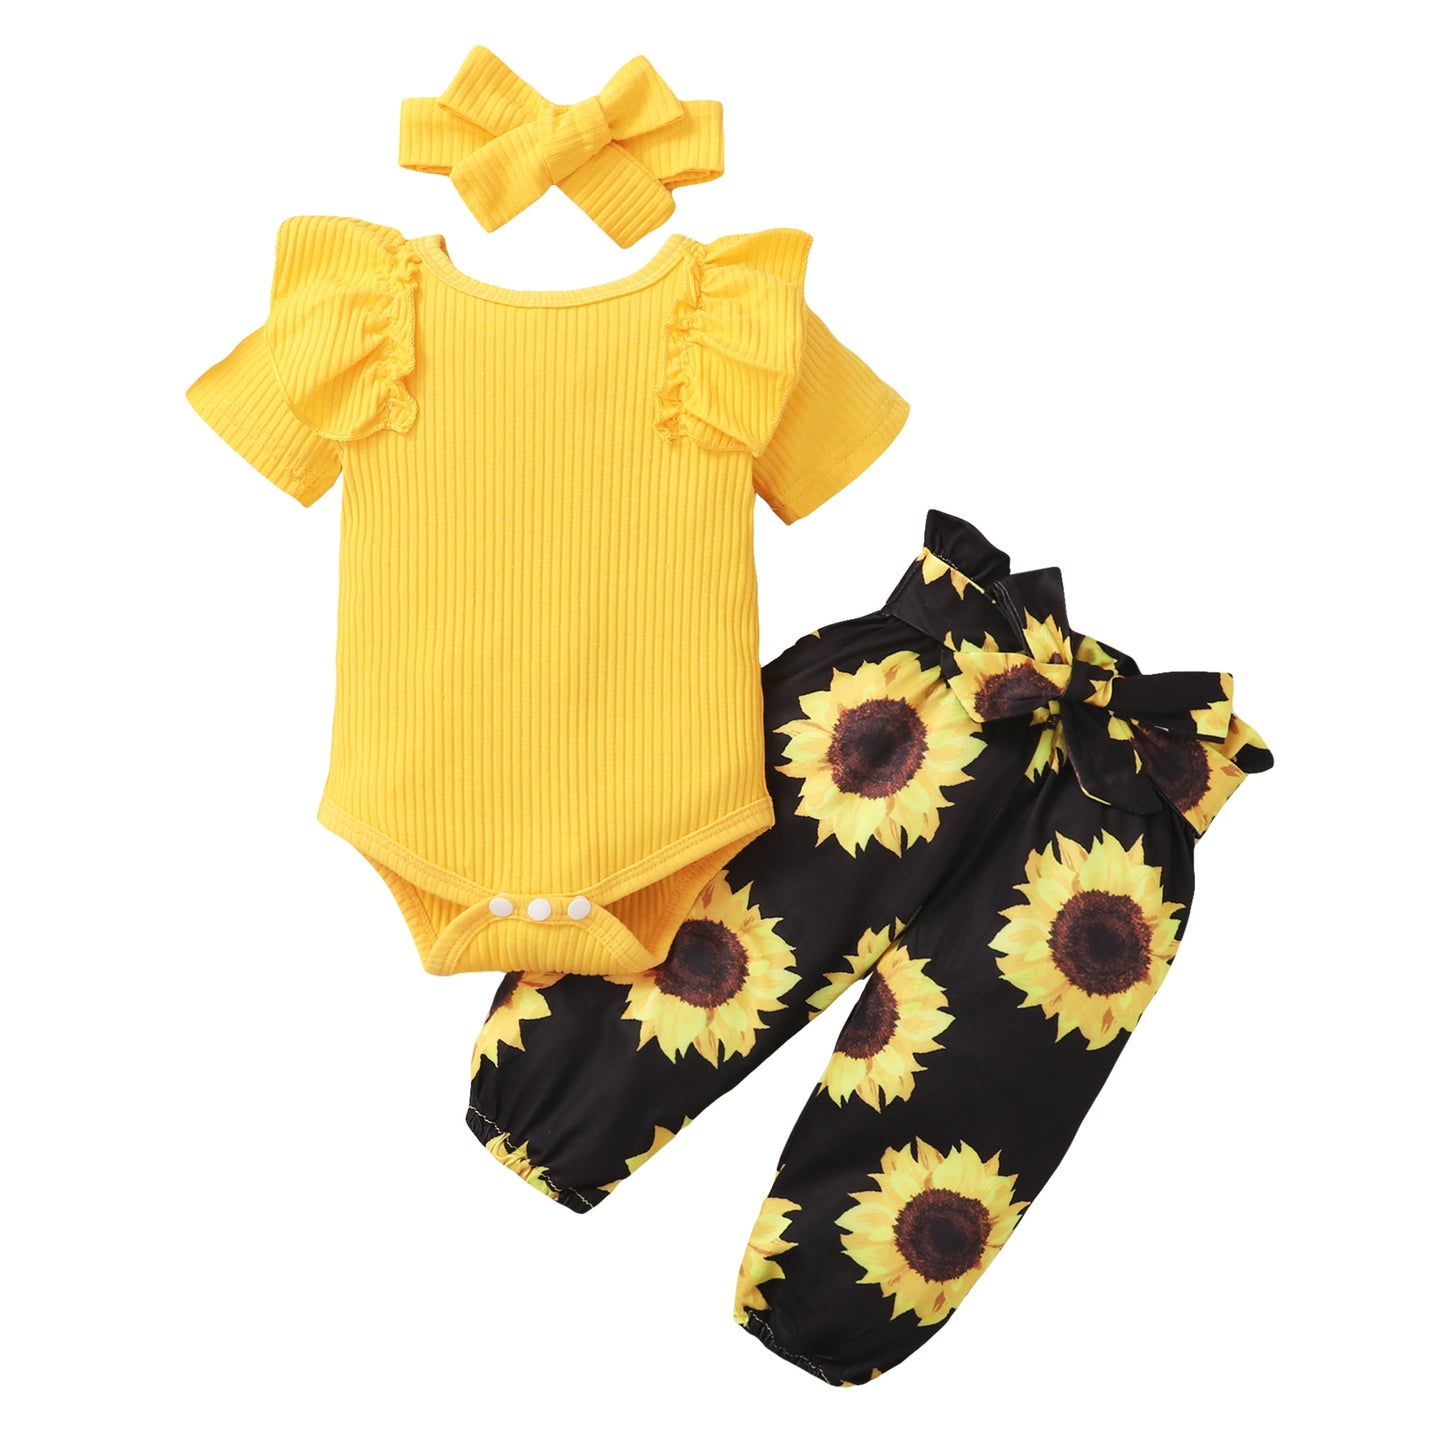 Newborn Baby Girl Clothes Set Toddler Girls Outfit Cute 3Pcs Ruffle Knit Romper+Sunflower Pants+Headband New Born Clothing